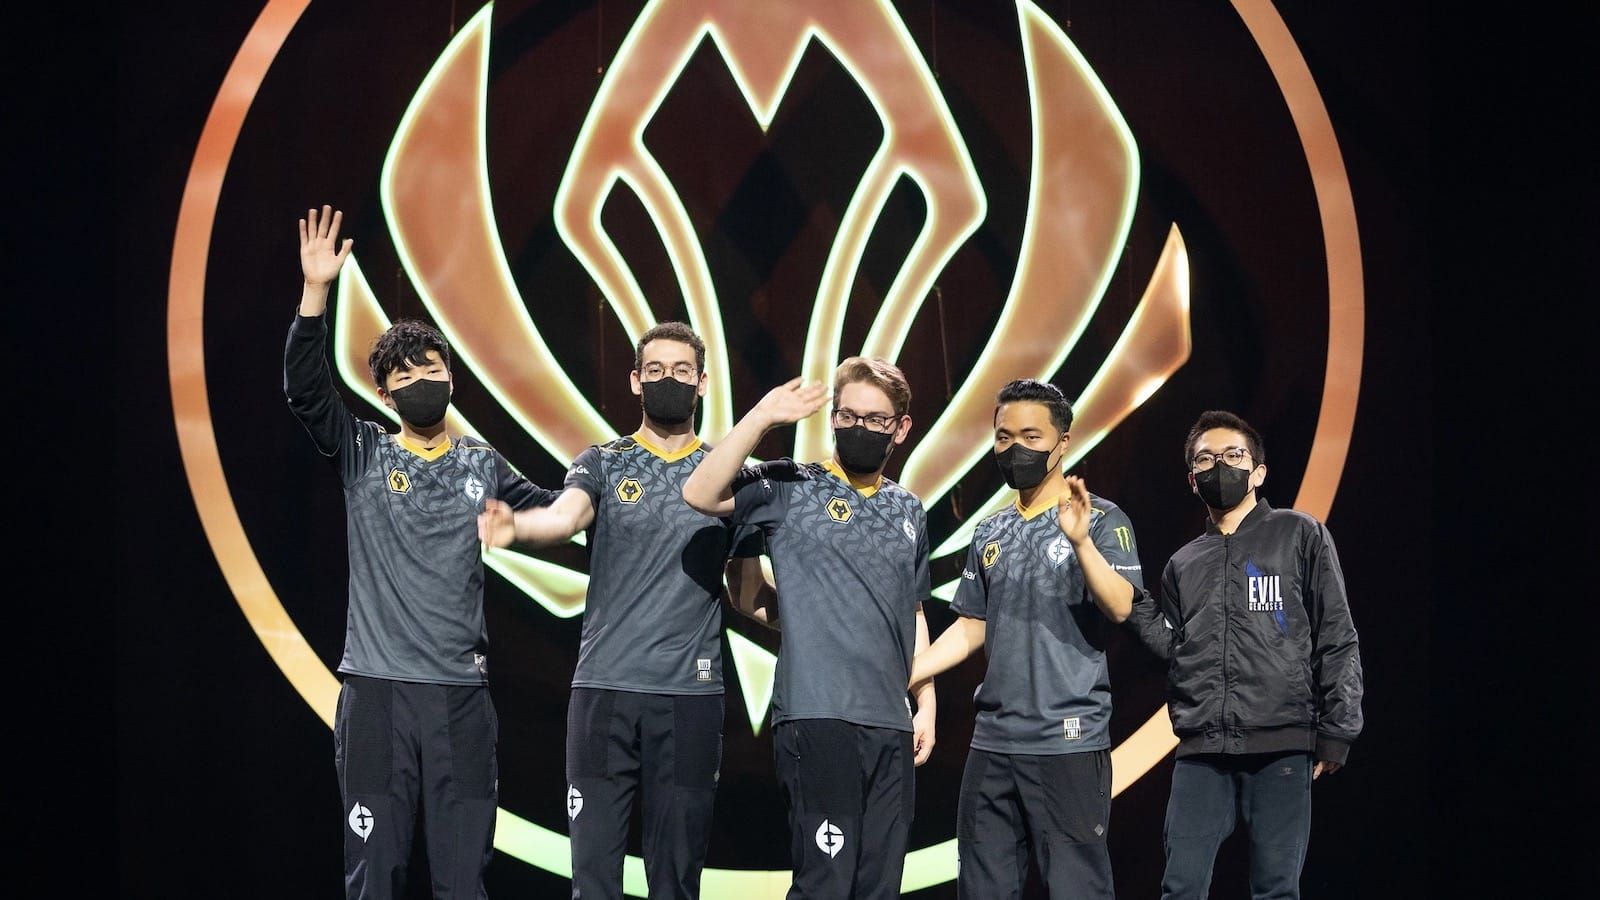 Evil Geniuses League of Legends team waves to the crowd after win while standing on stage in front of giant MSI logo